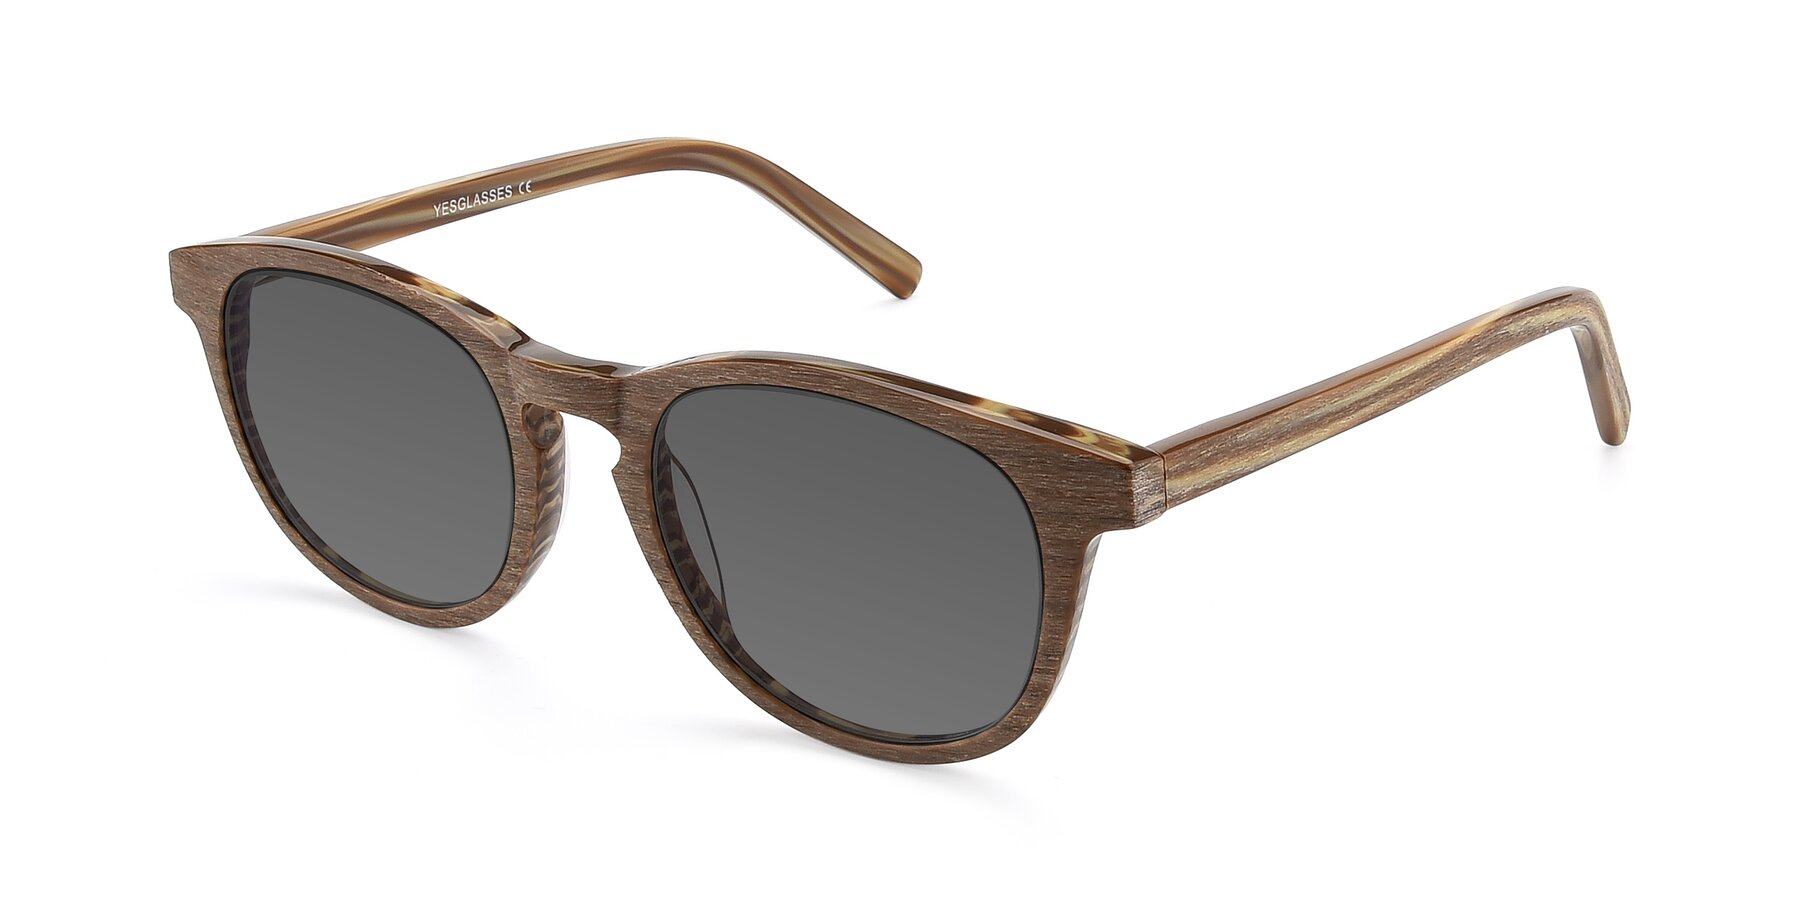 Angle of SR6044 in Brown-Wooden with Medium Gray Tinted Lenses